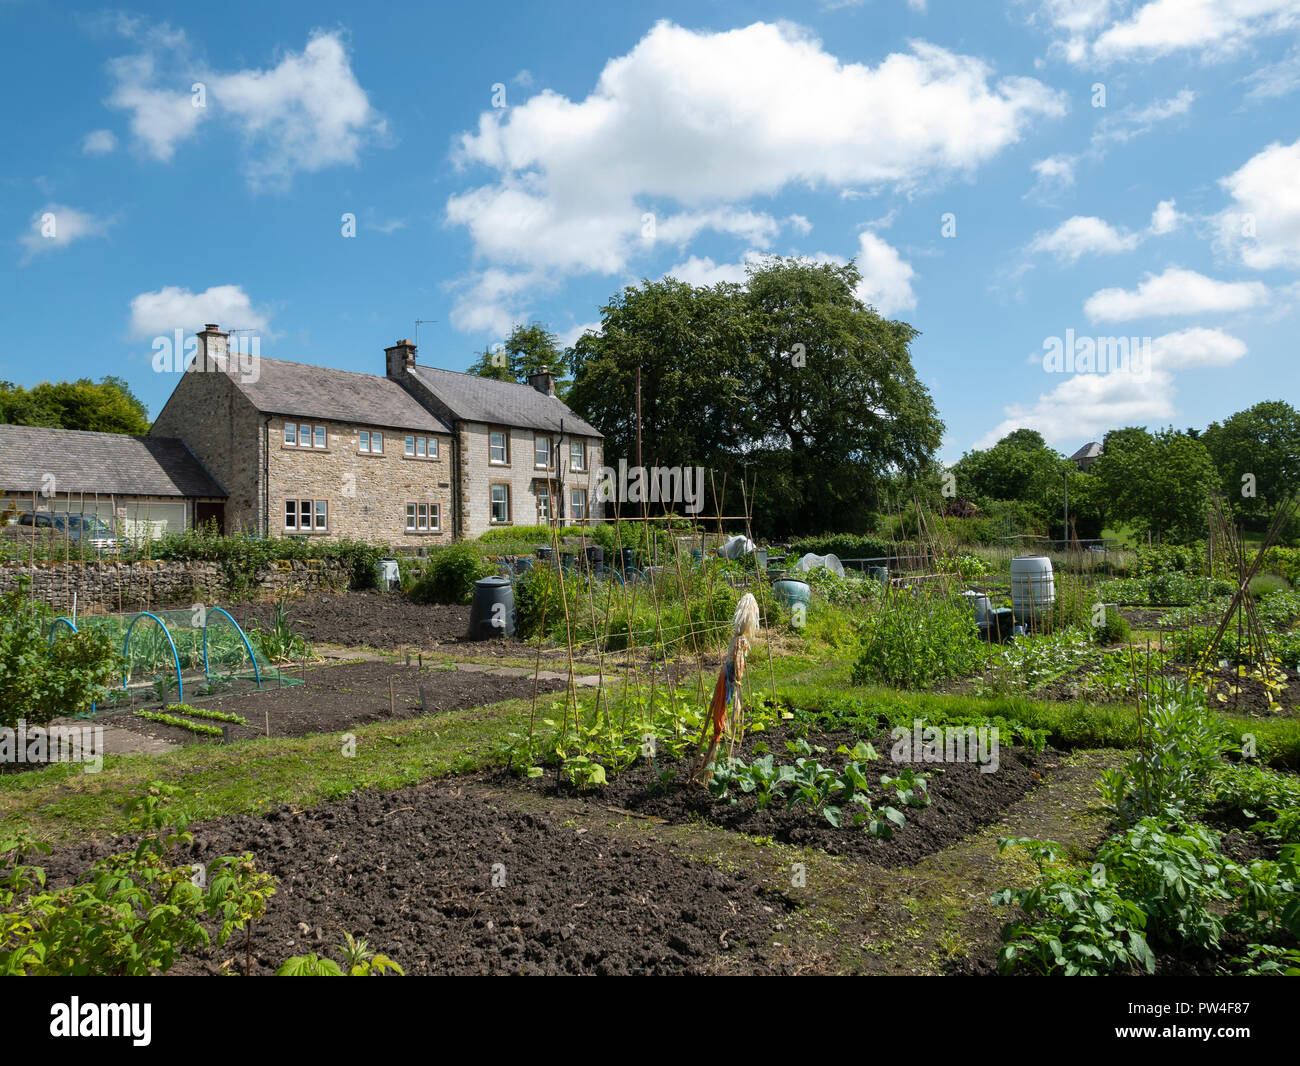 Allotments in Great Longstone, The Peak District National Park, Derbyshire, England. Stock Photo